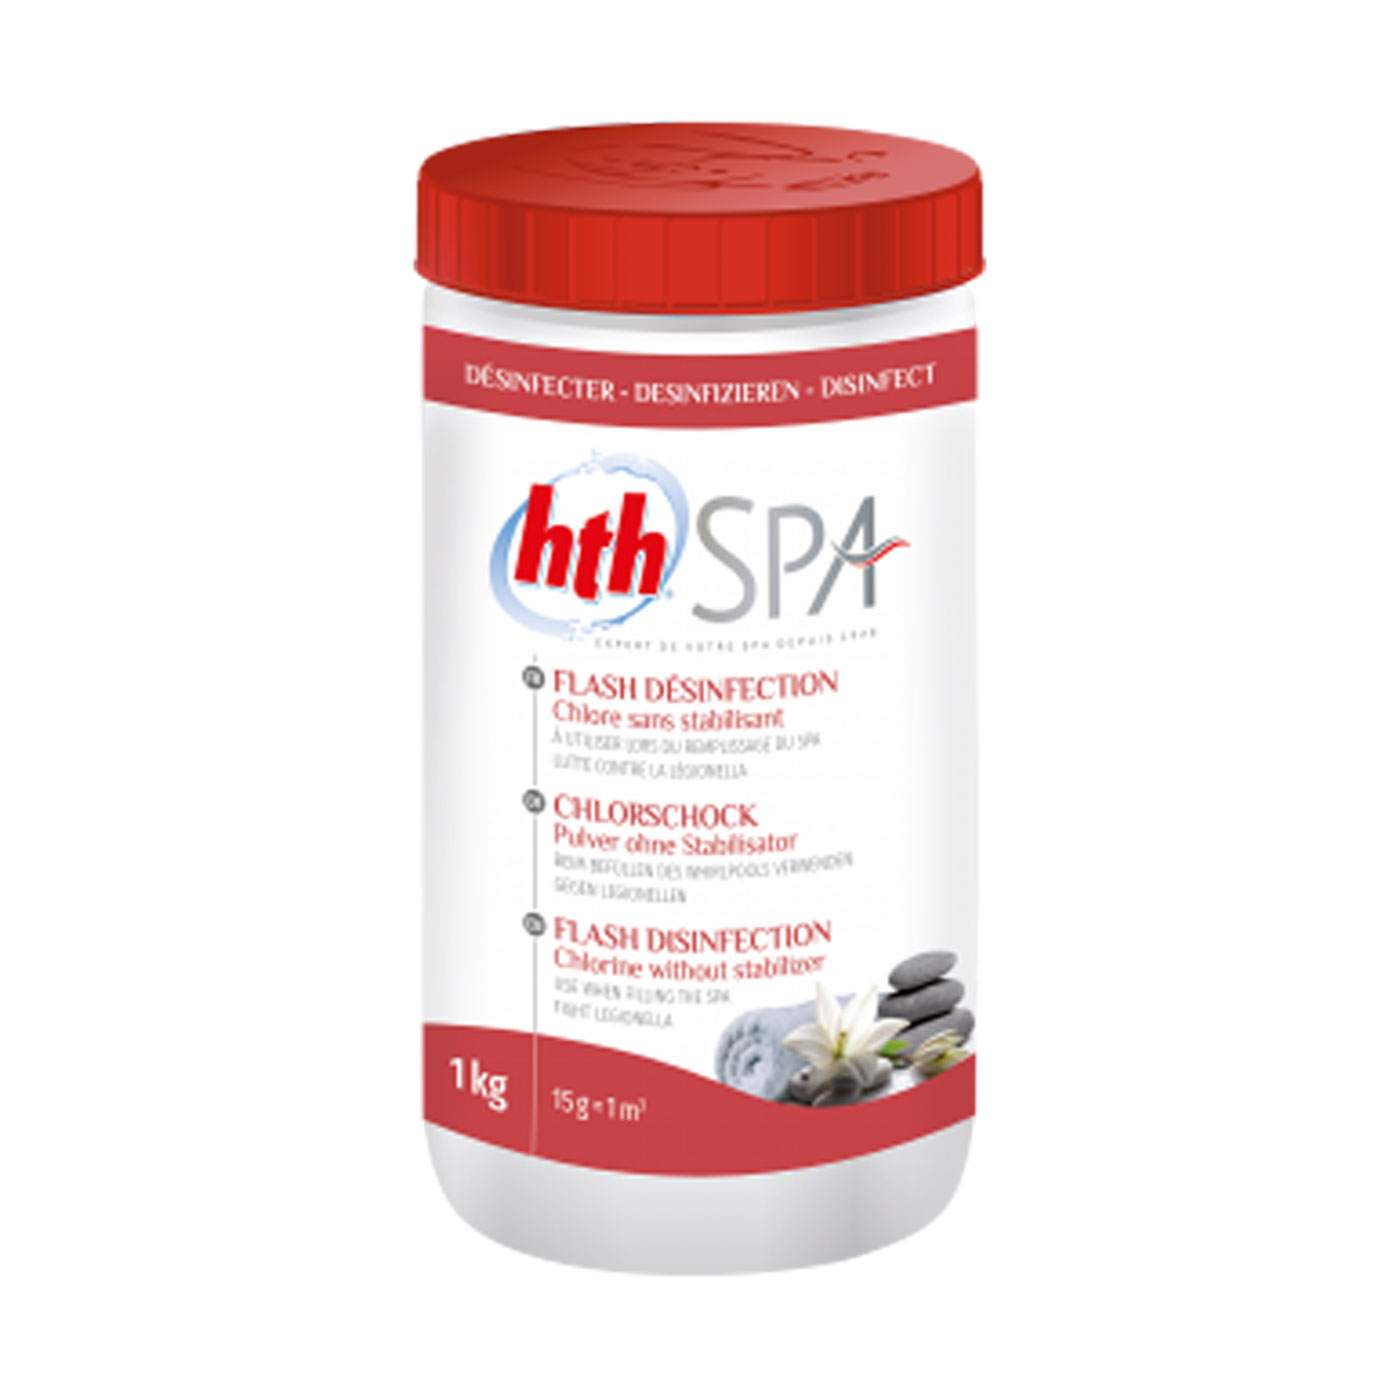 HTH Spa Flash Disinfection